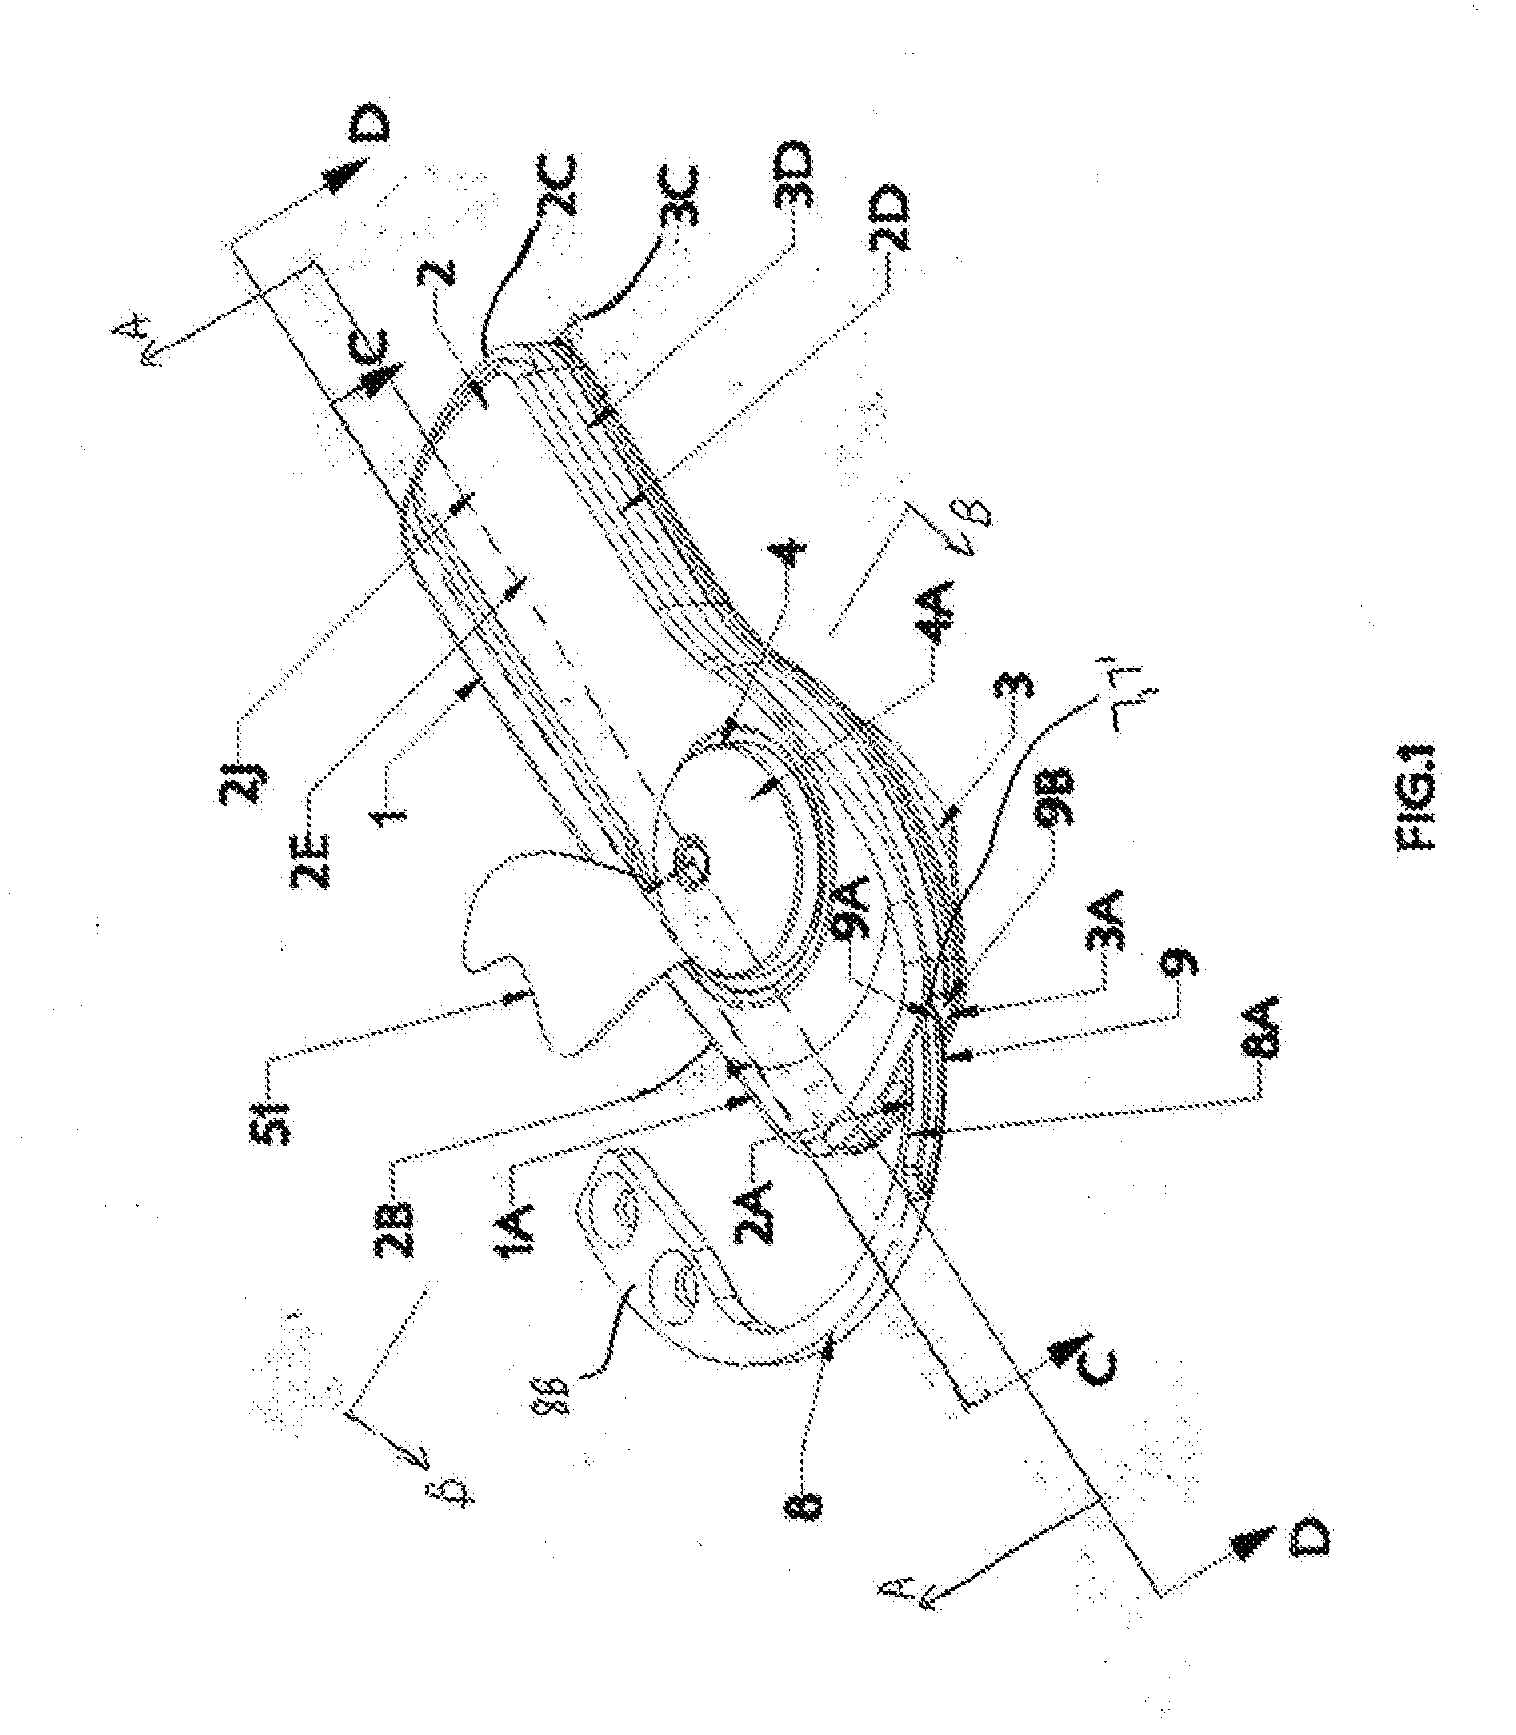 Electronic article surveillance tag having an expulsion detrimental substance system with substance routing system